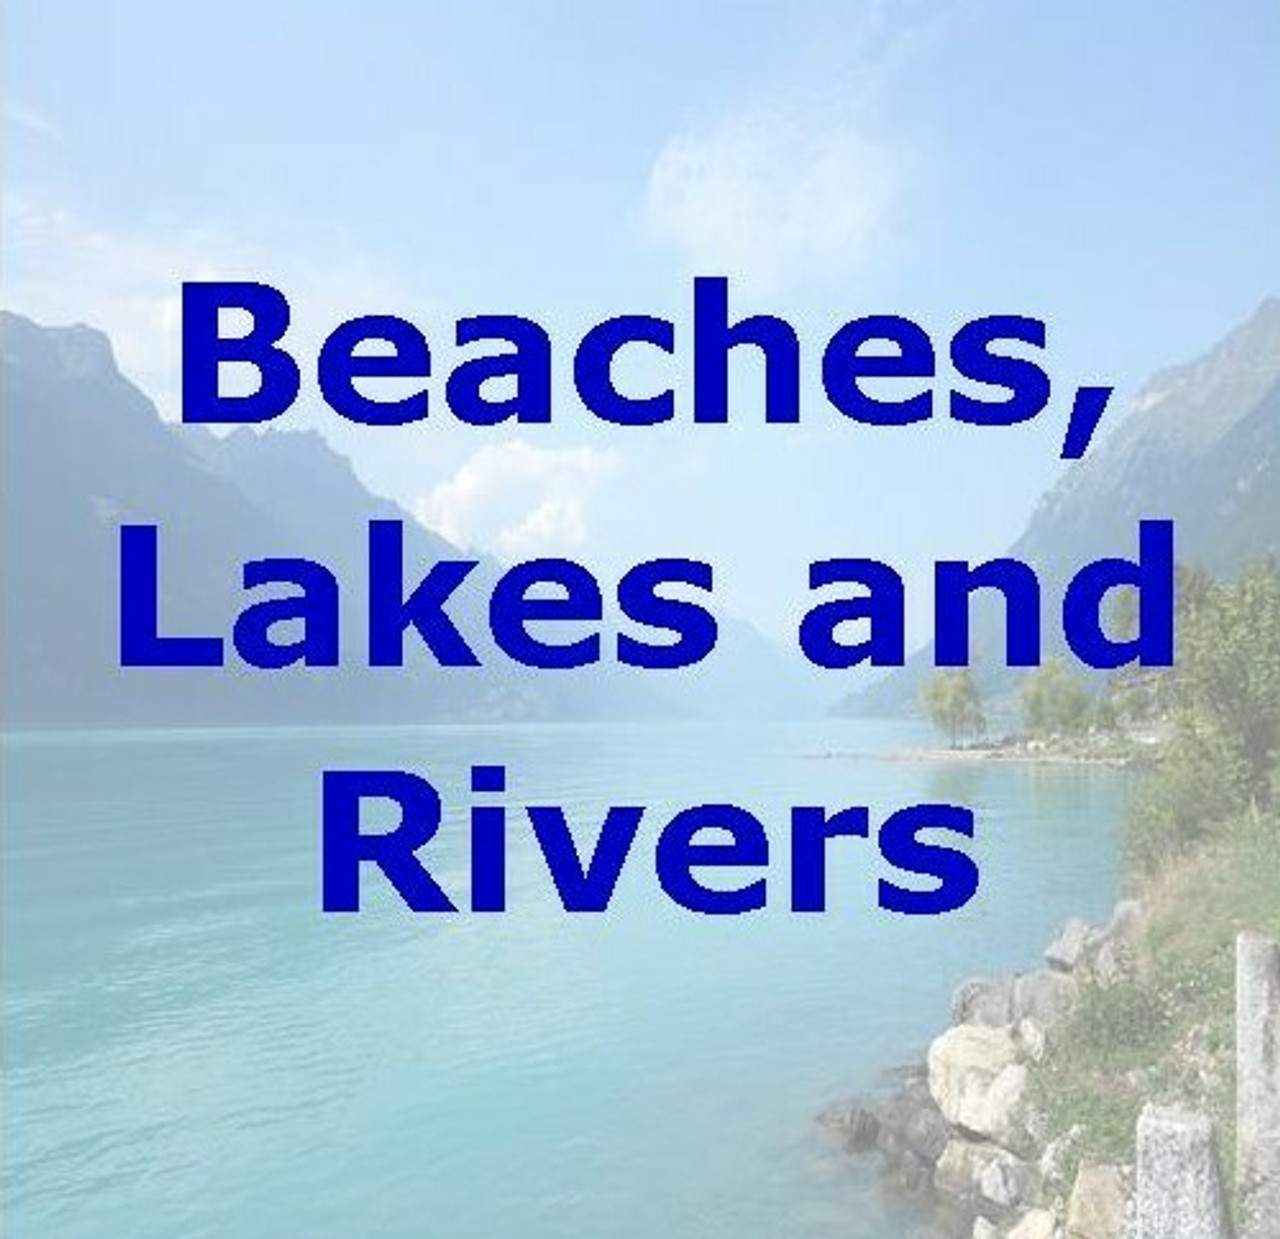 Beaches, Lakes and Rivers